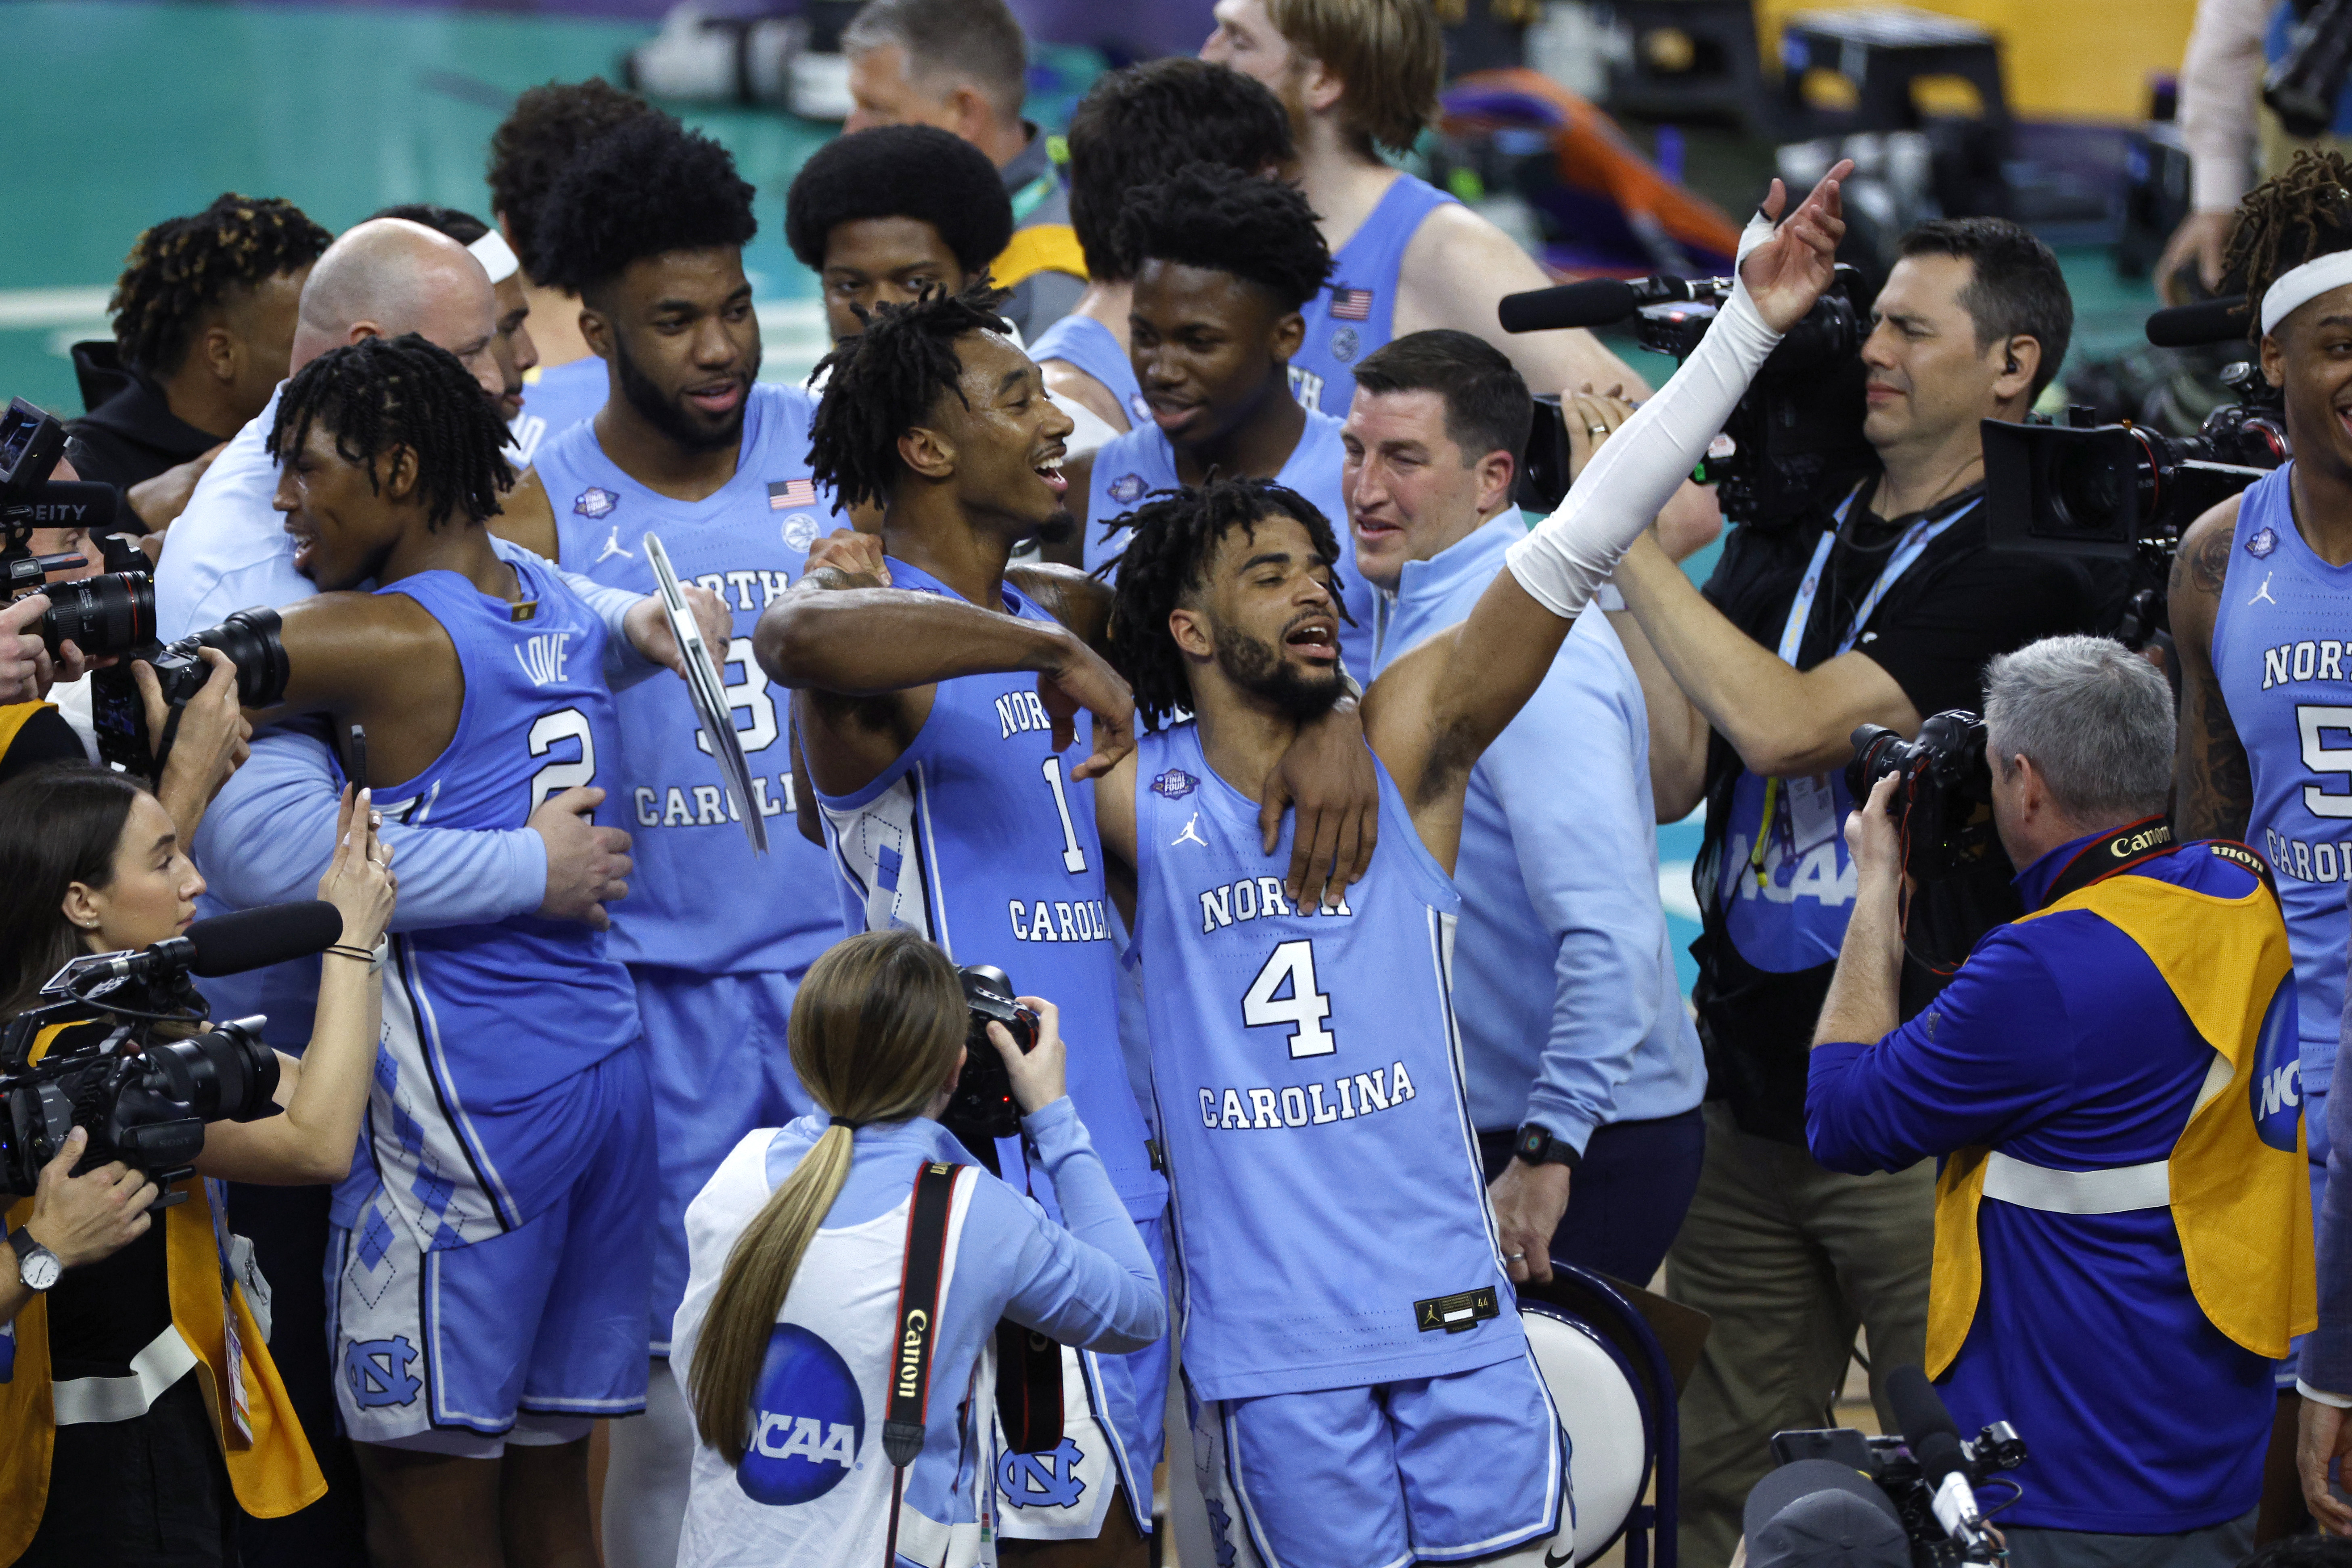 UNC Basketball: Bacot leads Tar Heels back to win column